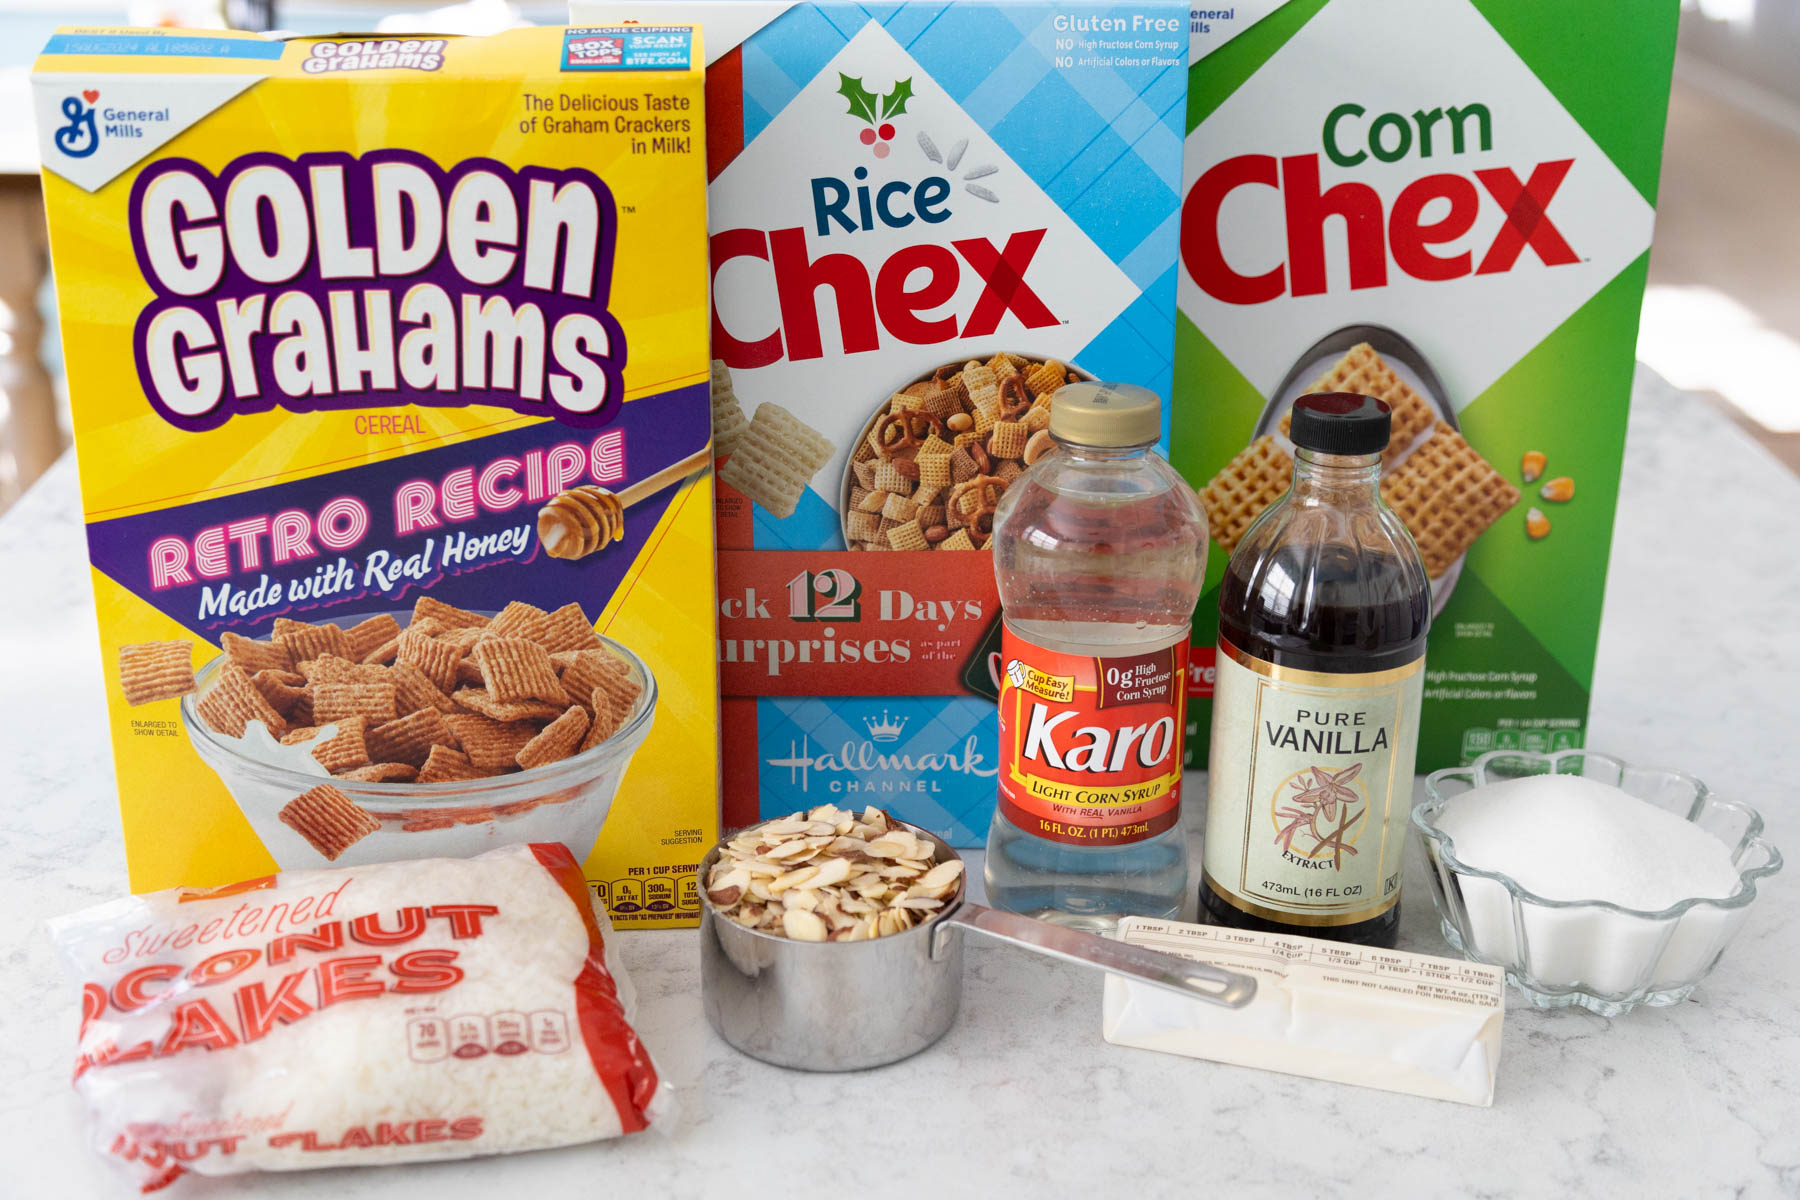 The boxes of cereal and other ingredients to make the Chex Mix are on the counter.